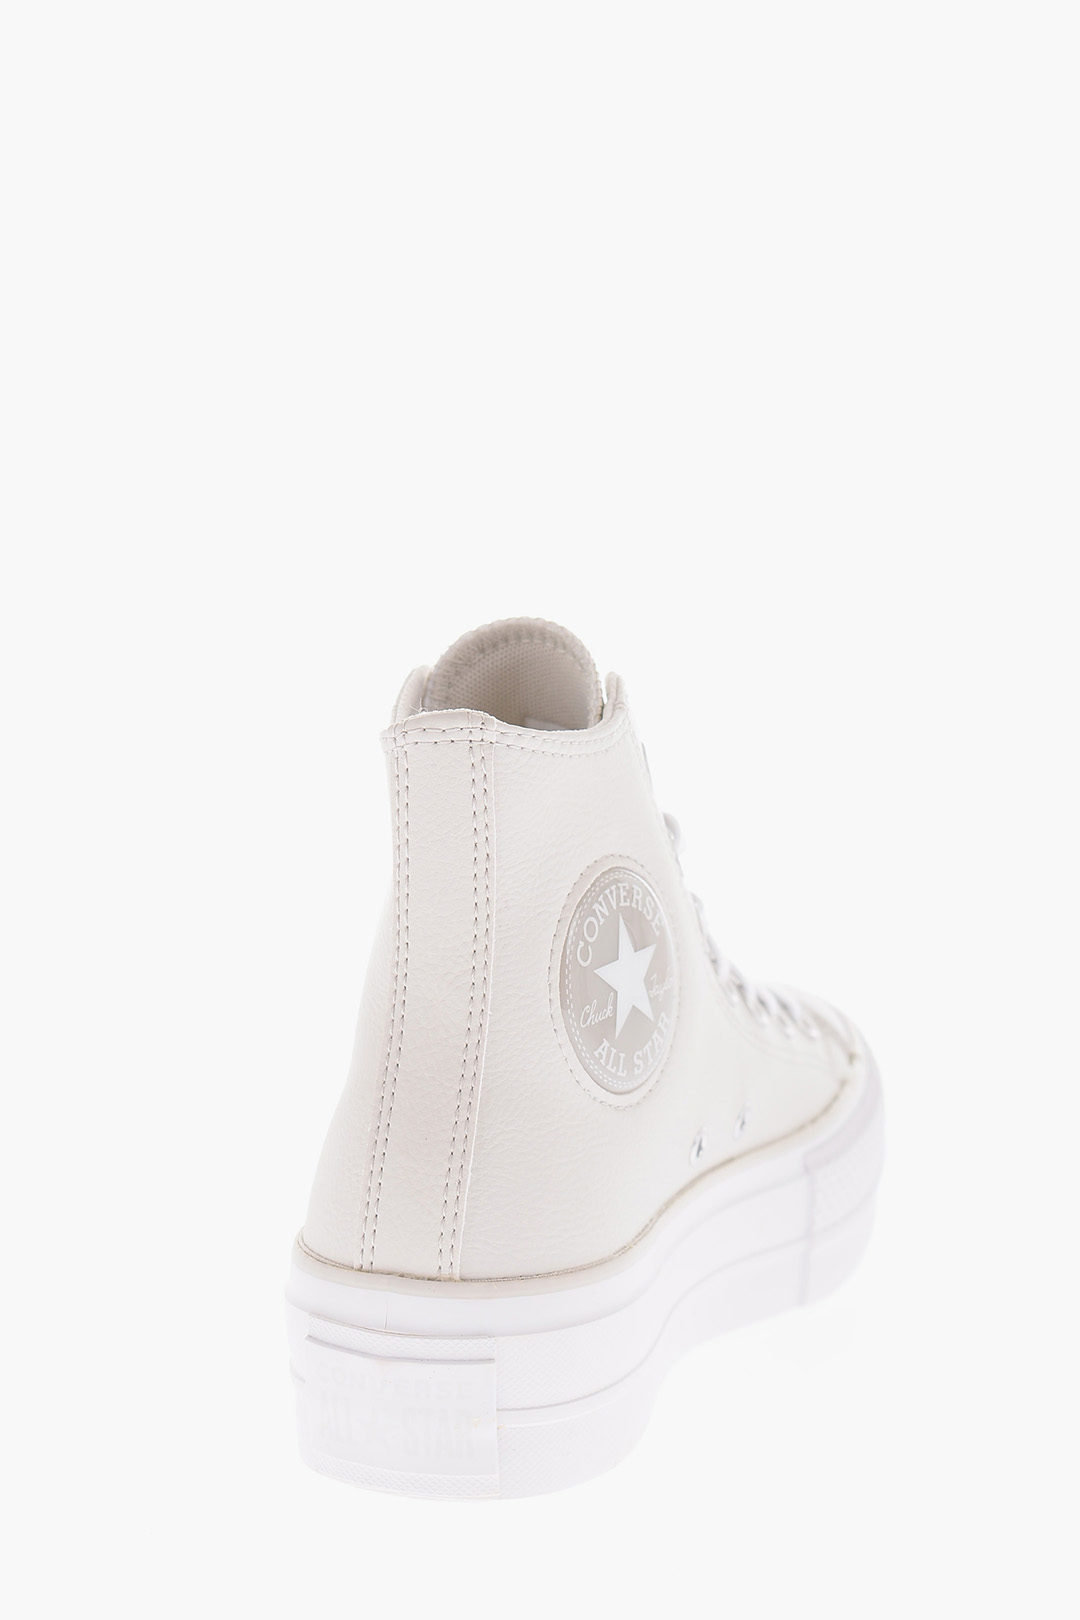 Converse ALL STAR CHUCK TAYLOR Leggings Stampati donna - Glamood Outlet